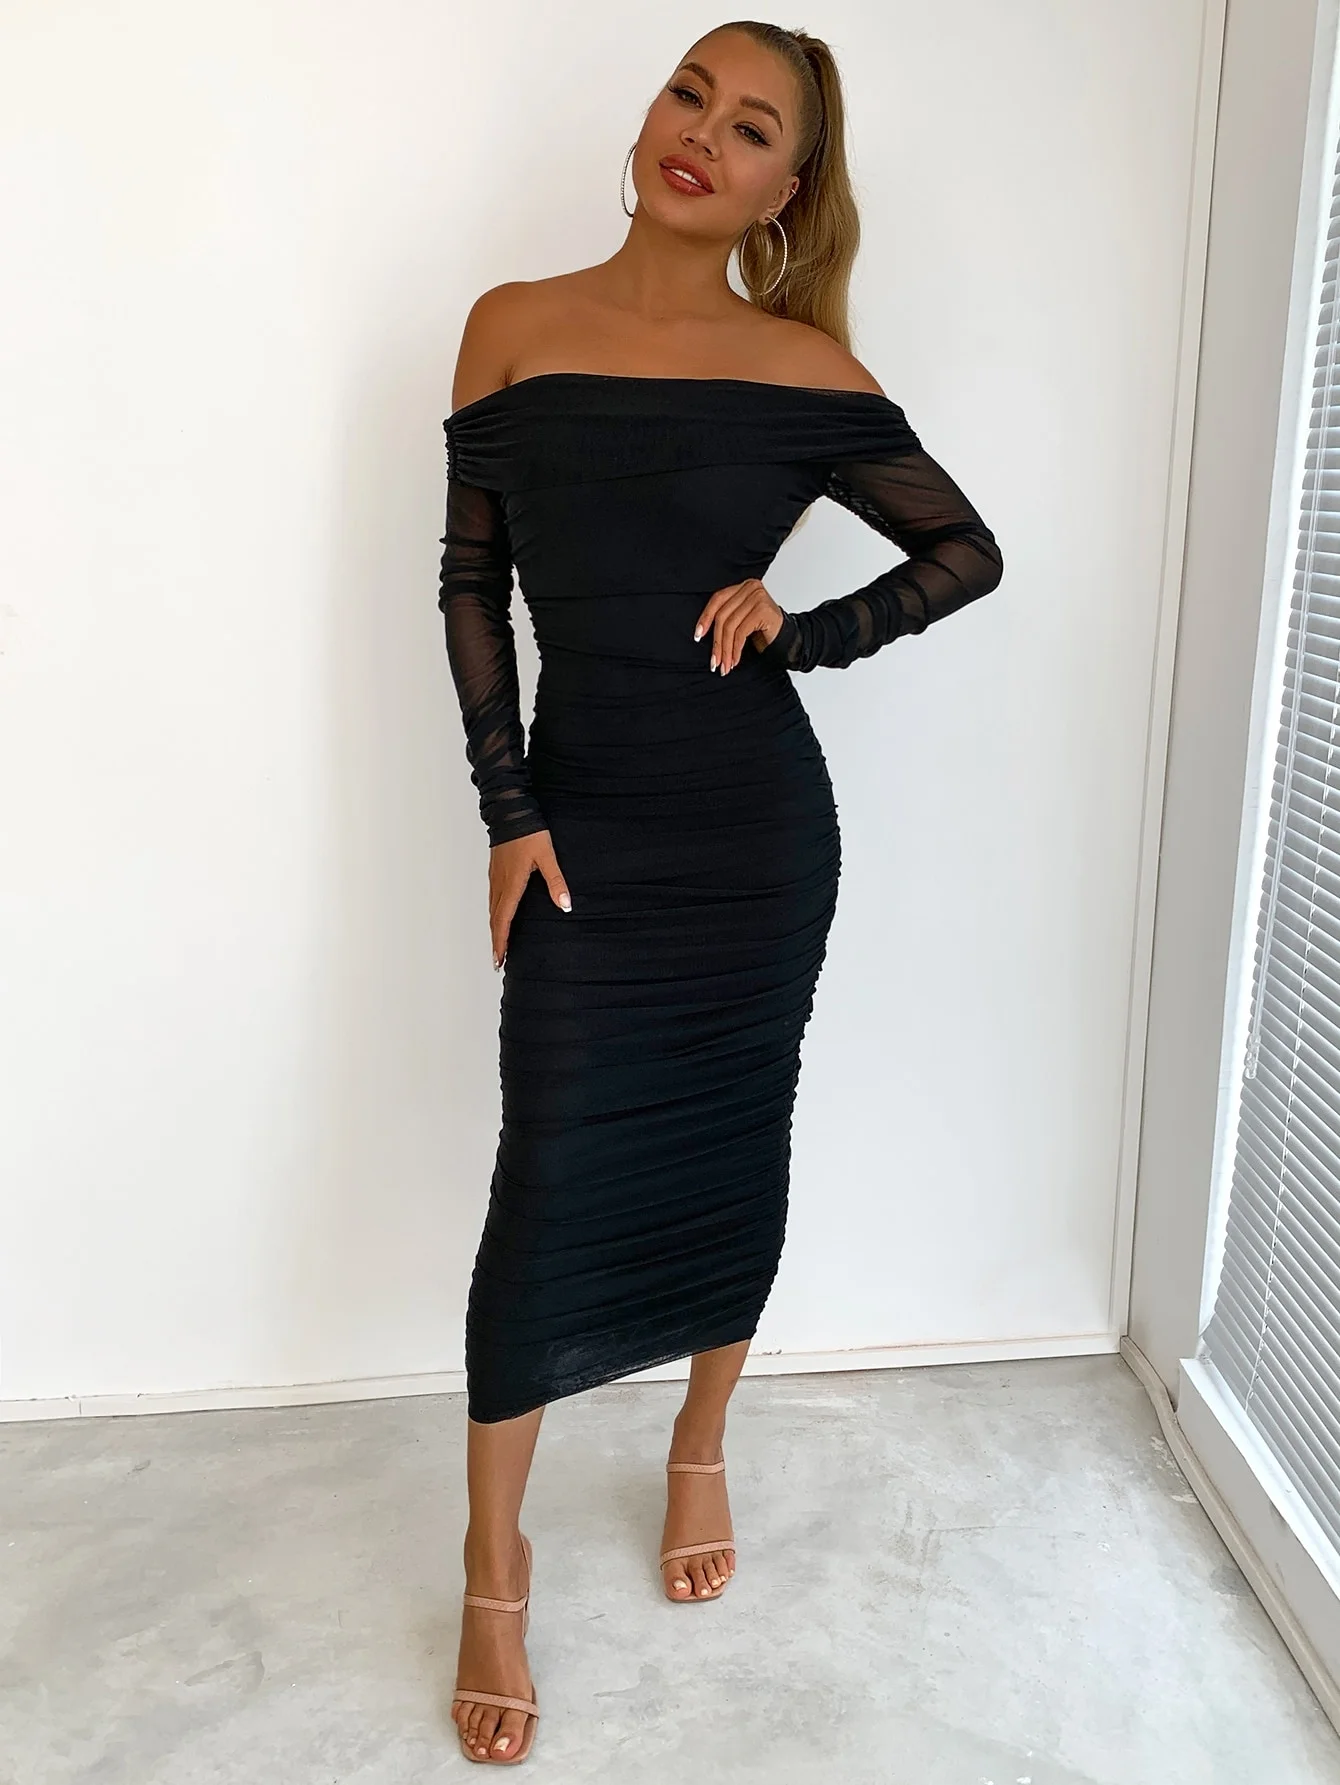 

JustChicc Off Shoulder Mesh Party Dress Women Clothing Sexy Club Backless Ruched Bodycon Dresses Long Sleeves Autumn Vestidos